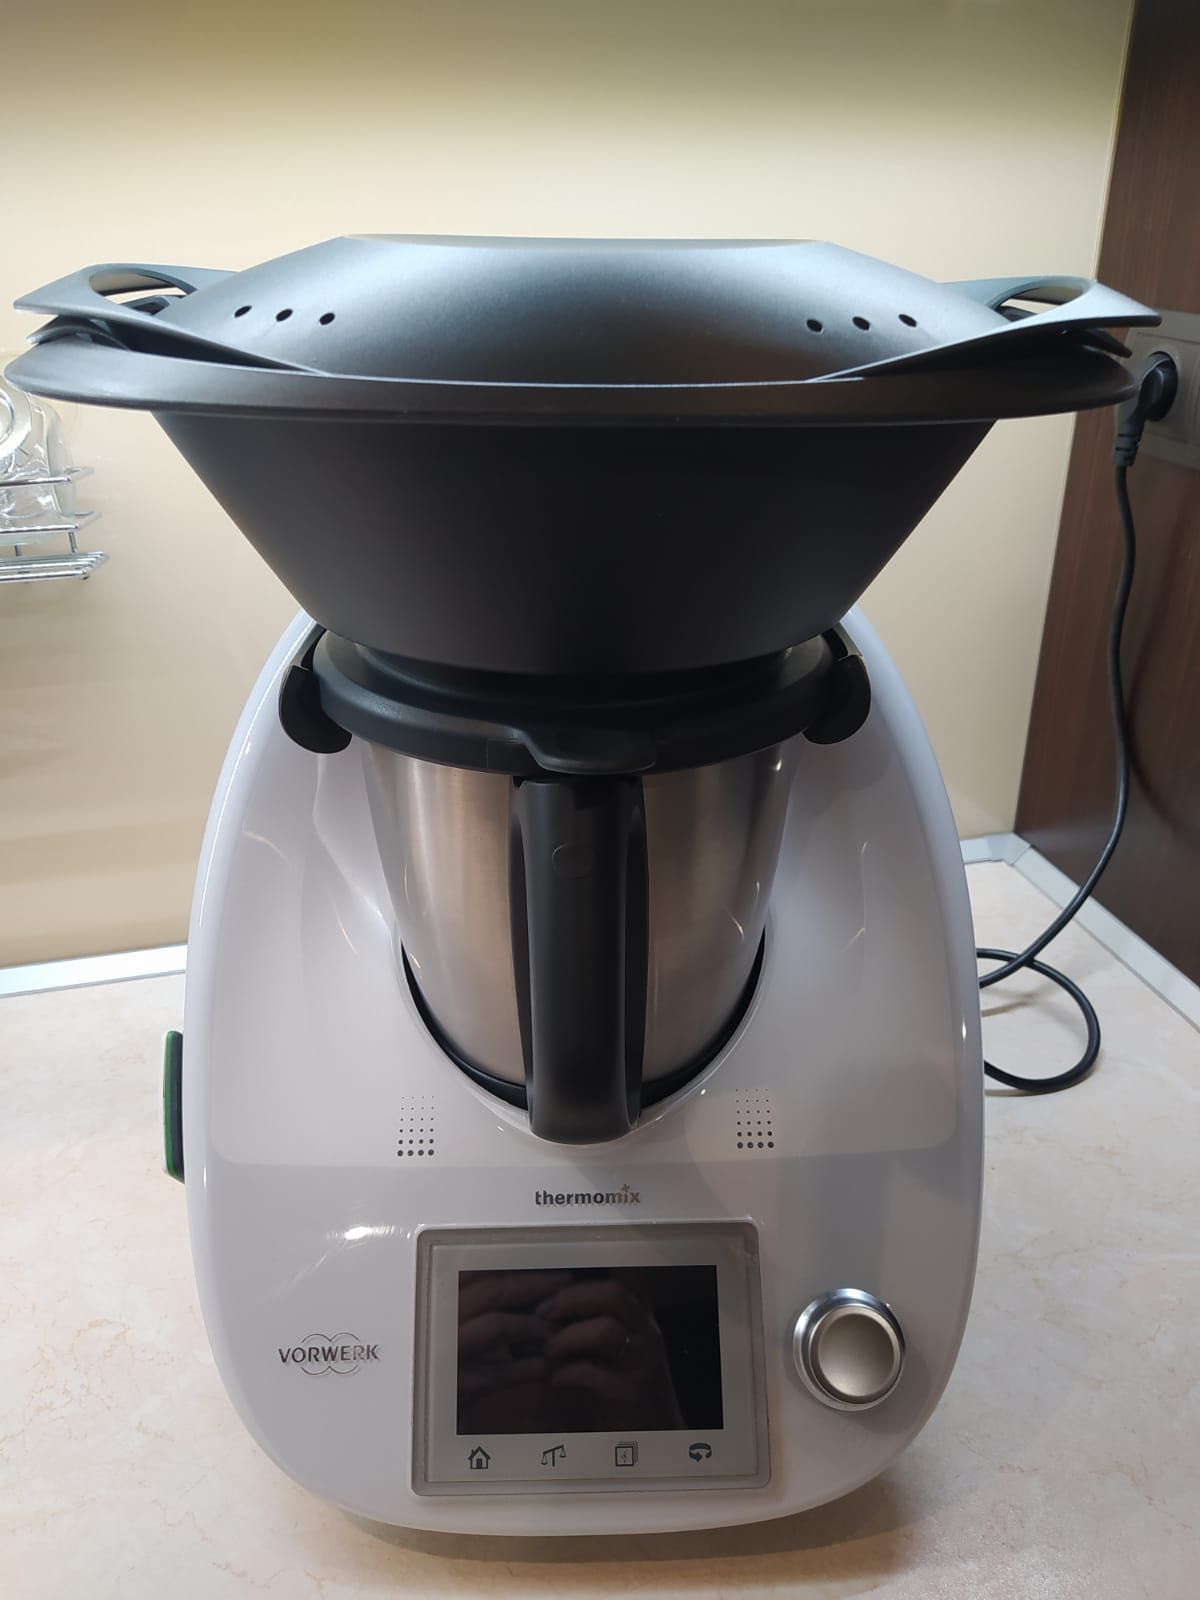 Thermomix 5 plus cook key